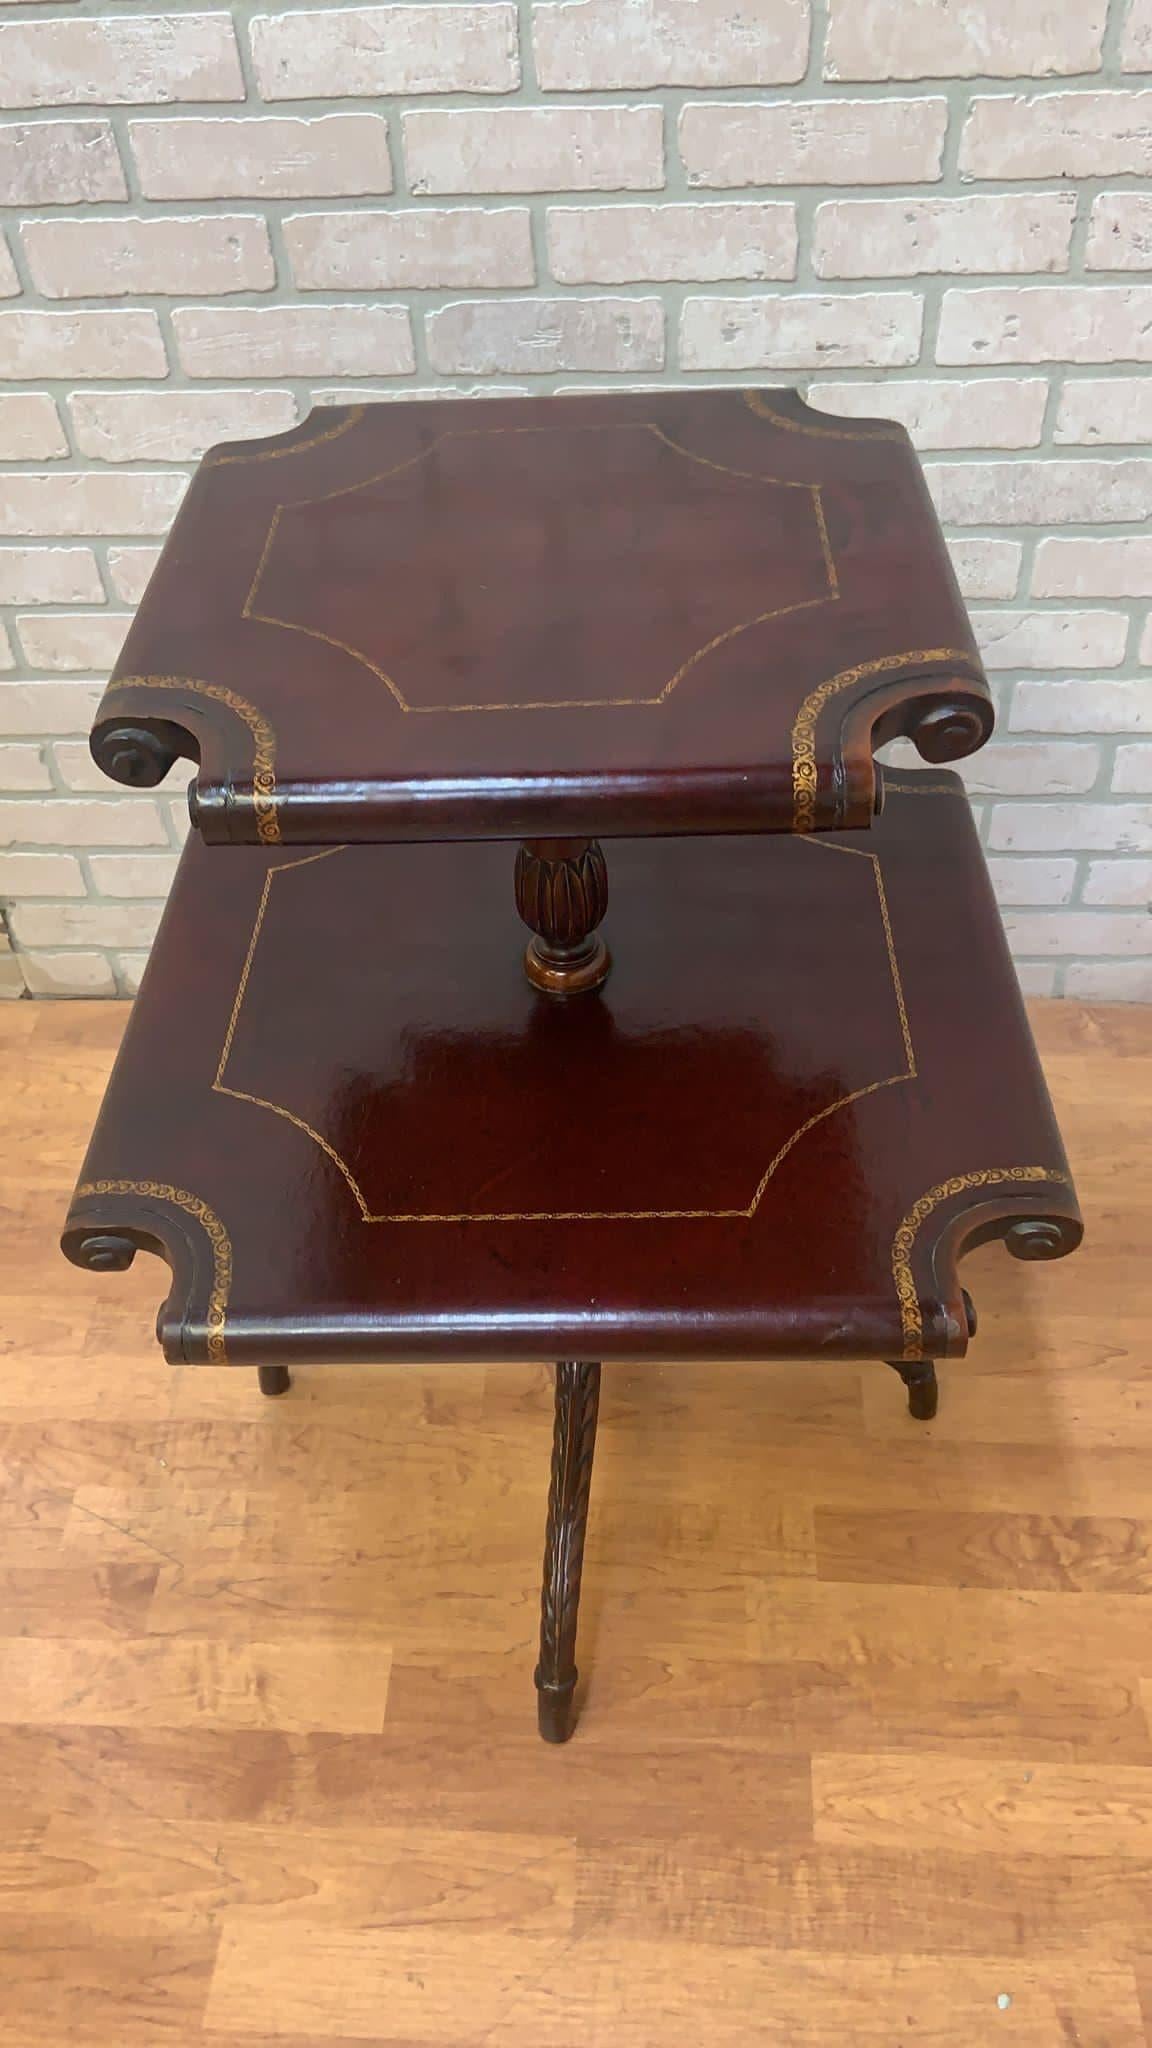 Antique English Sheraton Style Scrolled & Carved Mahogany Two-Tier Tooled Leather Wrapped Side Table

This antique English Sheraton style side table is a captivating and finely crafted piece of furniture, showcasing the elegance of the Sheraton